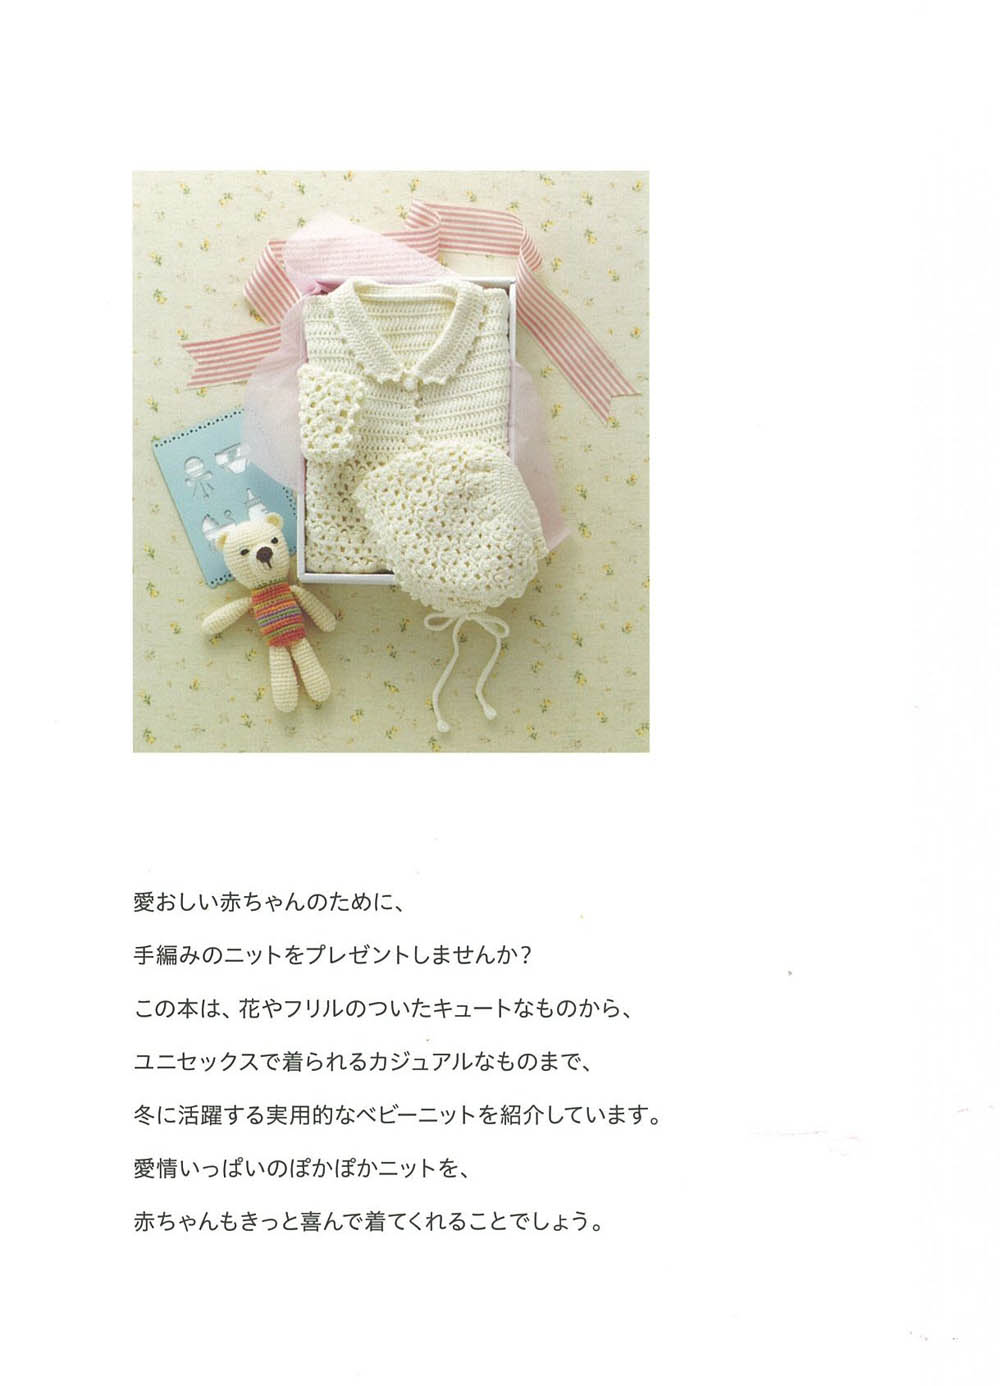 Hand-crocheted baby simple knit small princess baby